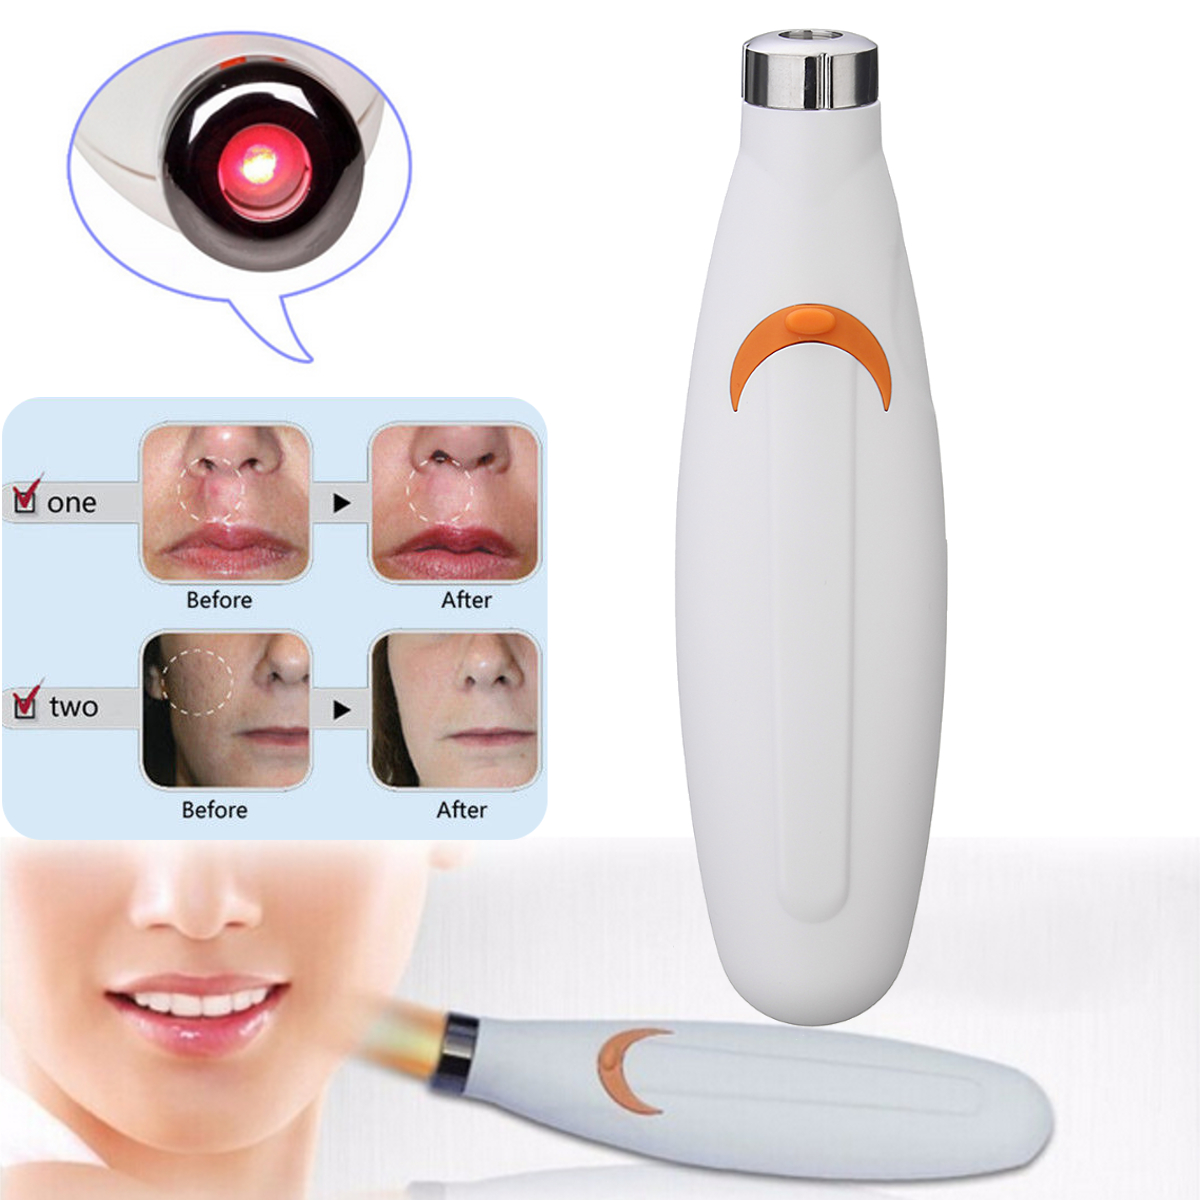 Laser Therapy Machine Acne Pen Soft Scar Blemish Wrinkle Removal Light Treatment Beauty Tool